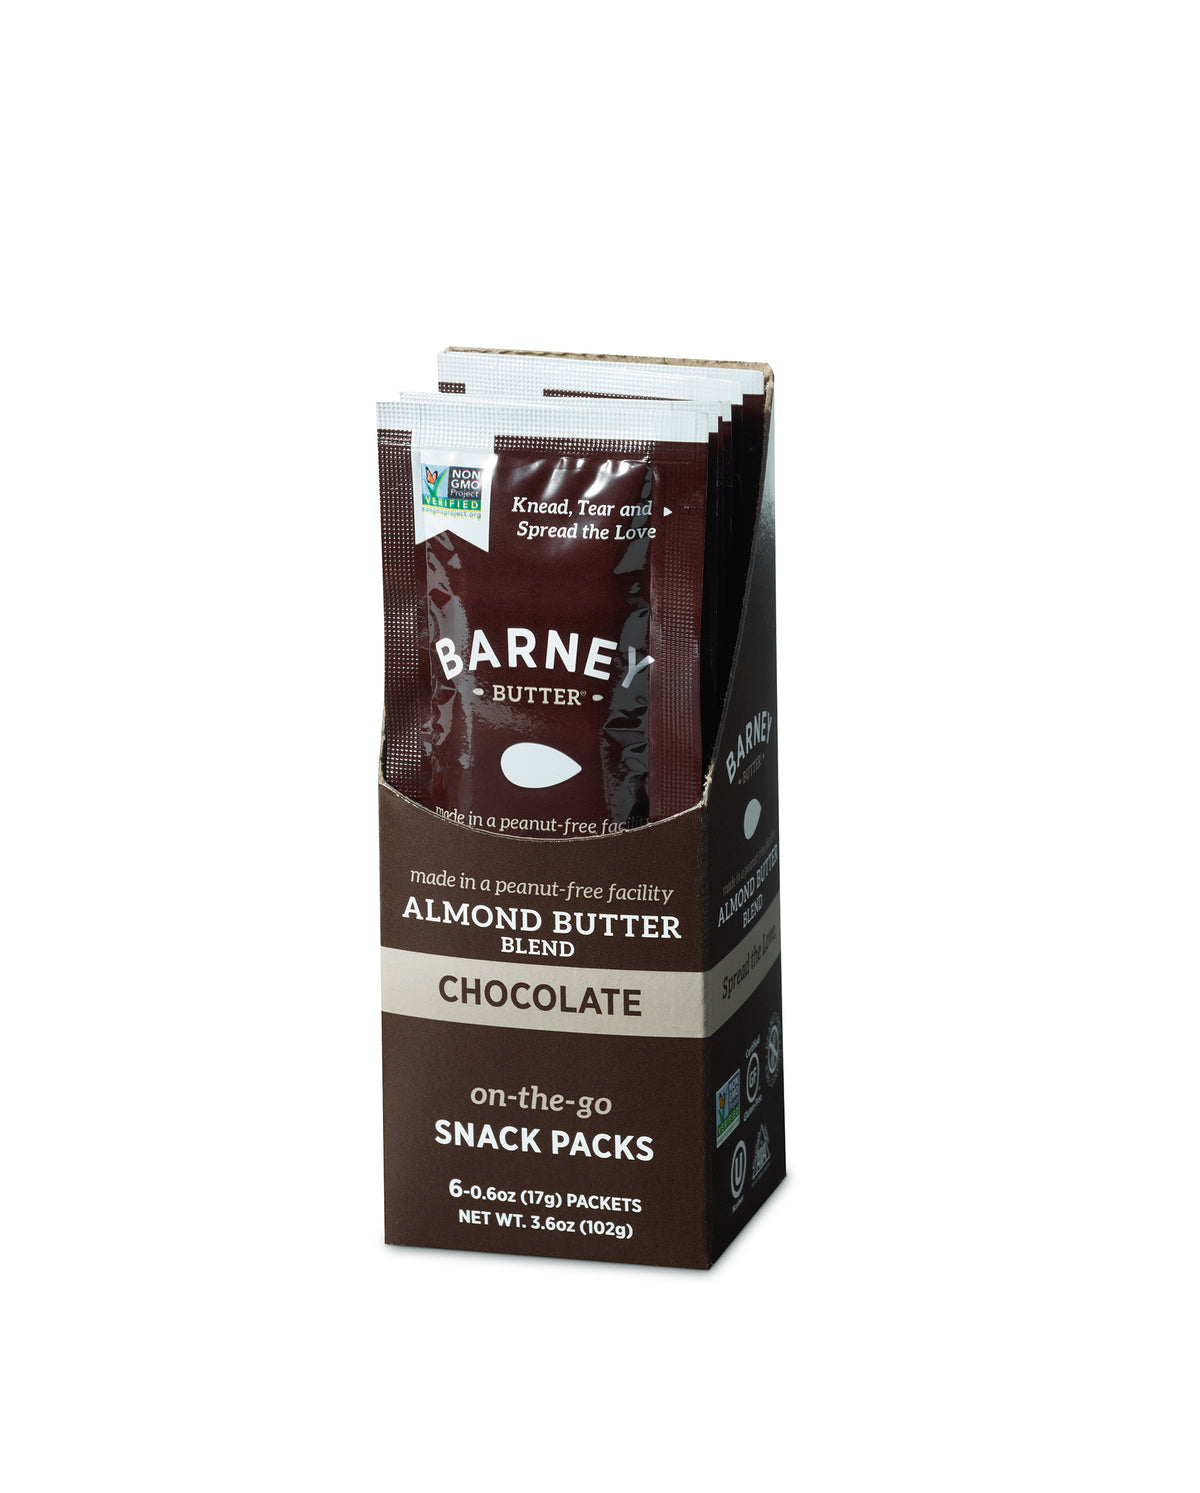 Chocolate Almond Butter Snack Pack